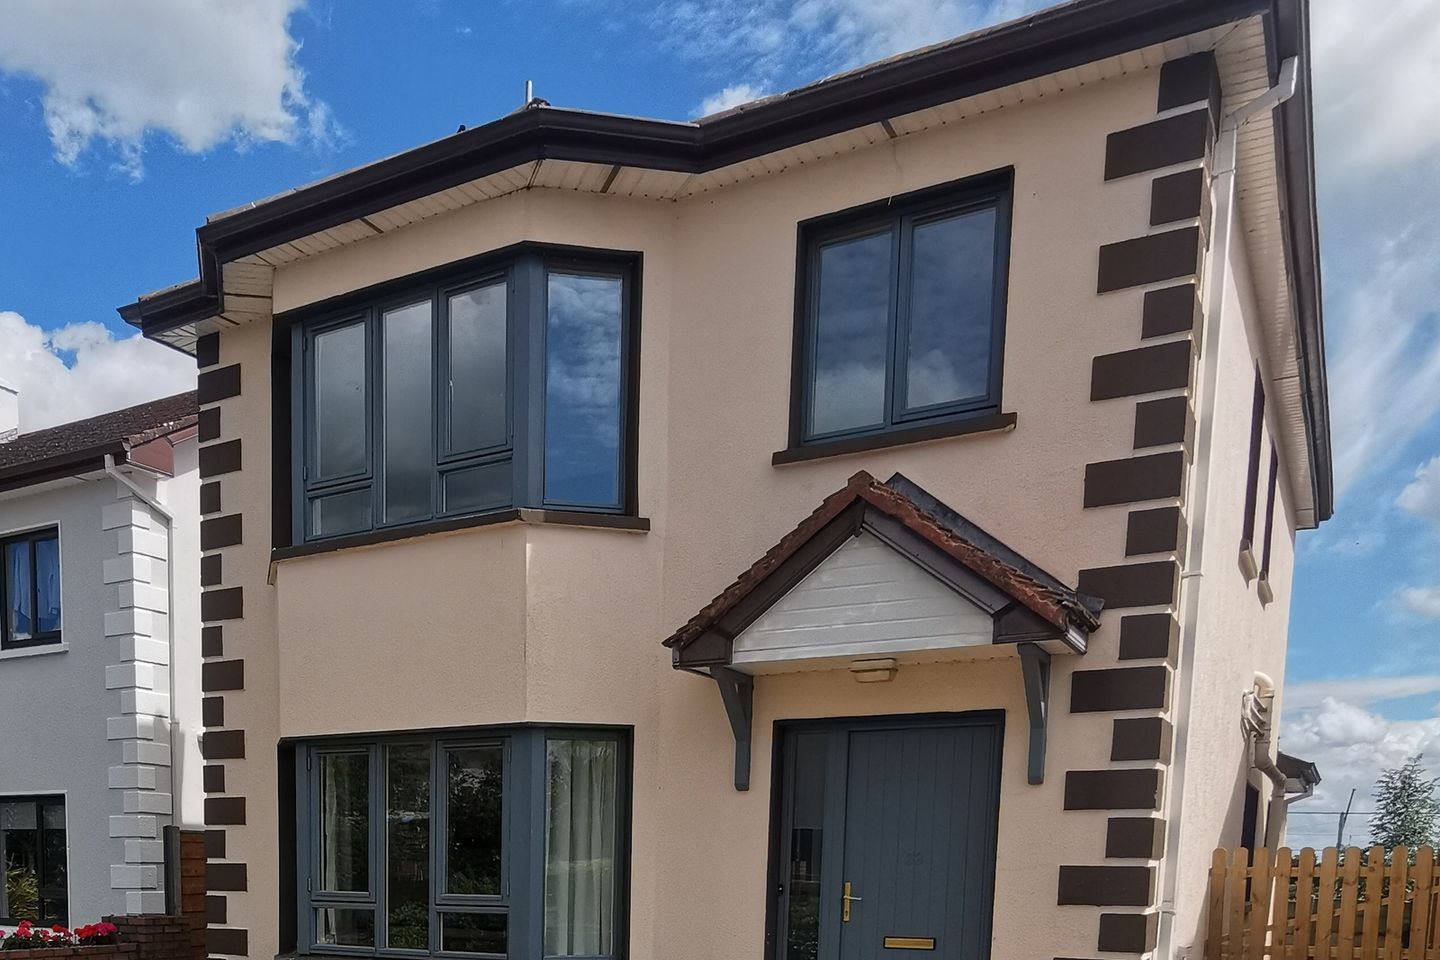 33 Abbeyville, Galway Road, Roscommon Town, Co. Roscommon